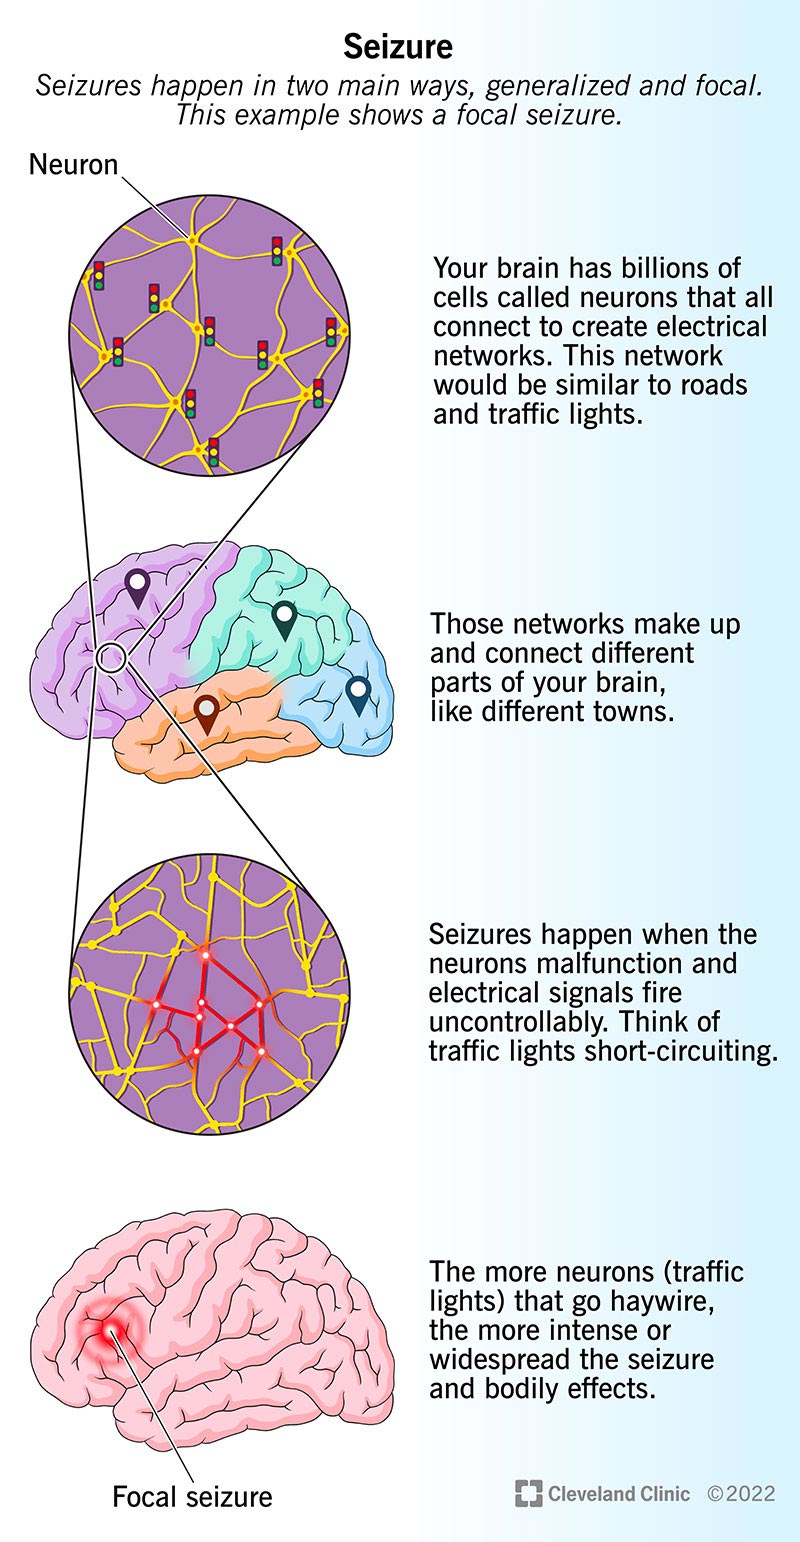 Neural networks in your brain transmit signals. Seizures disrupt this electrical flow.